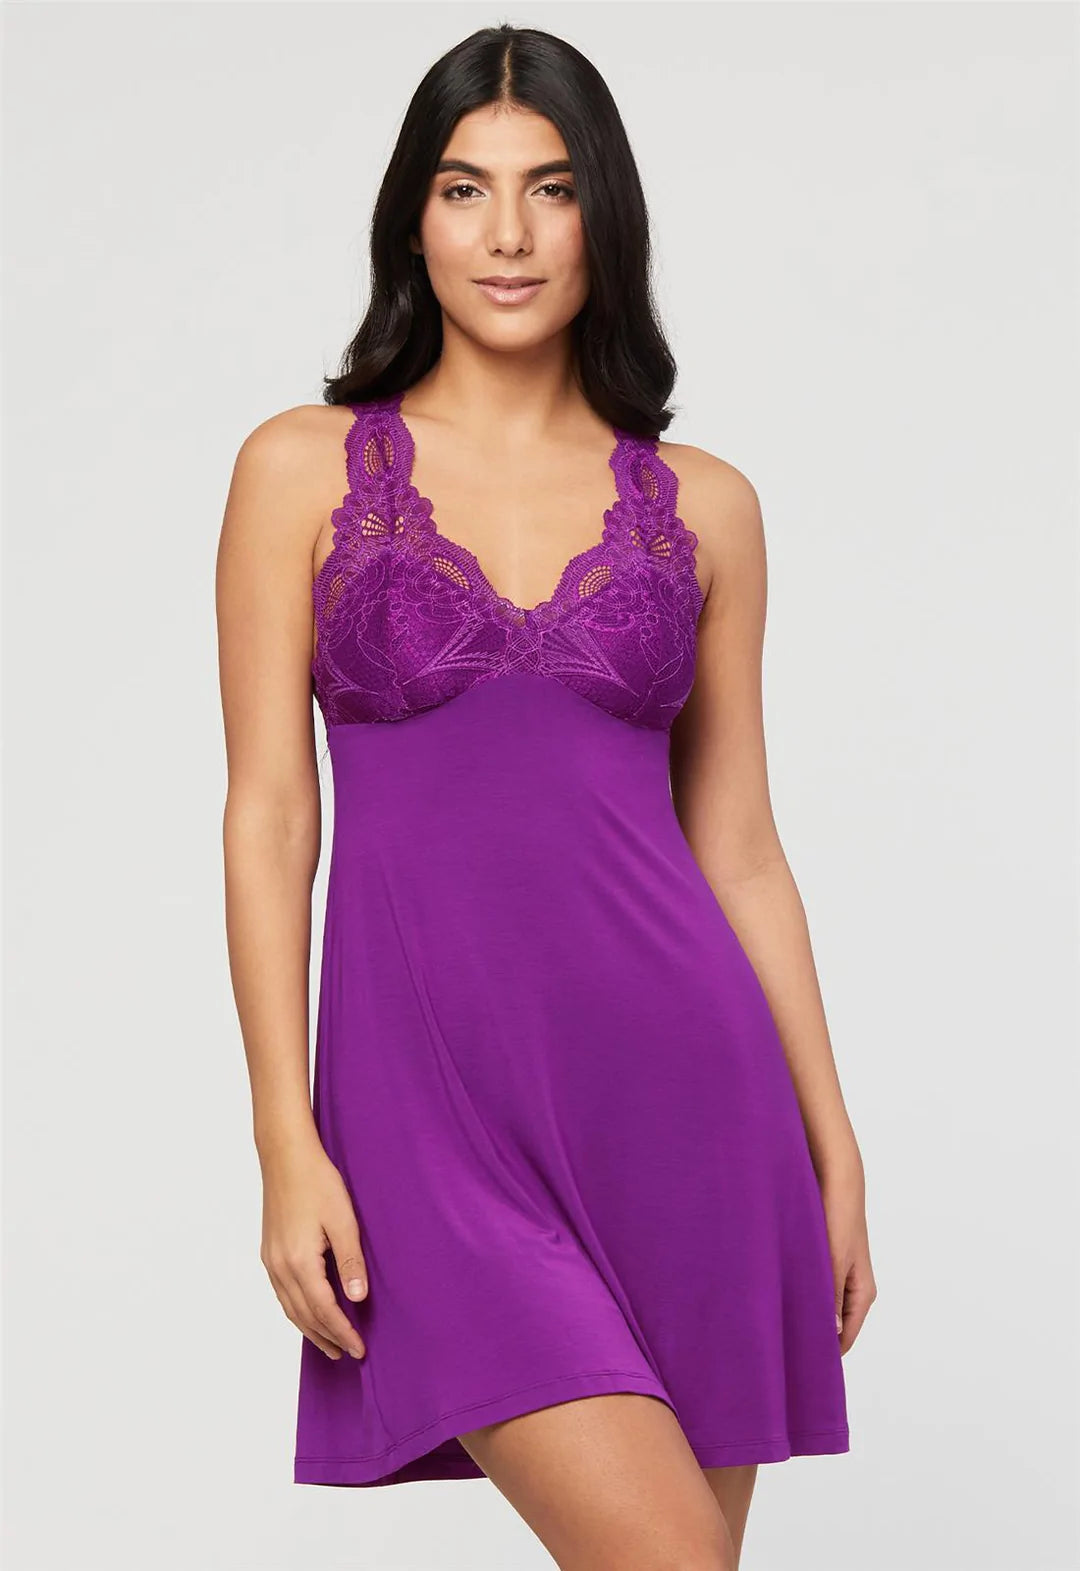 Modal Bust Support Chemise in Mesa Rose